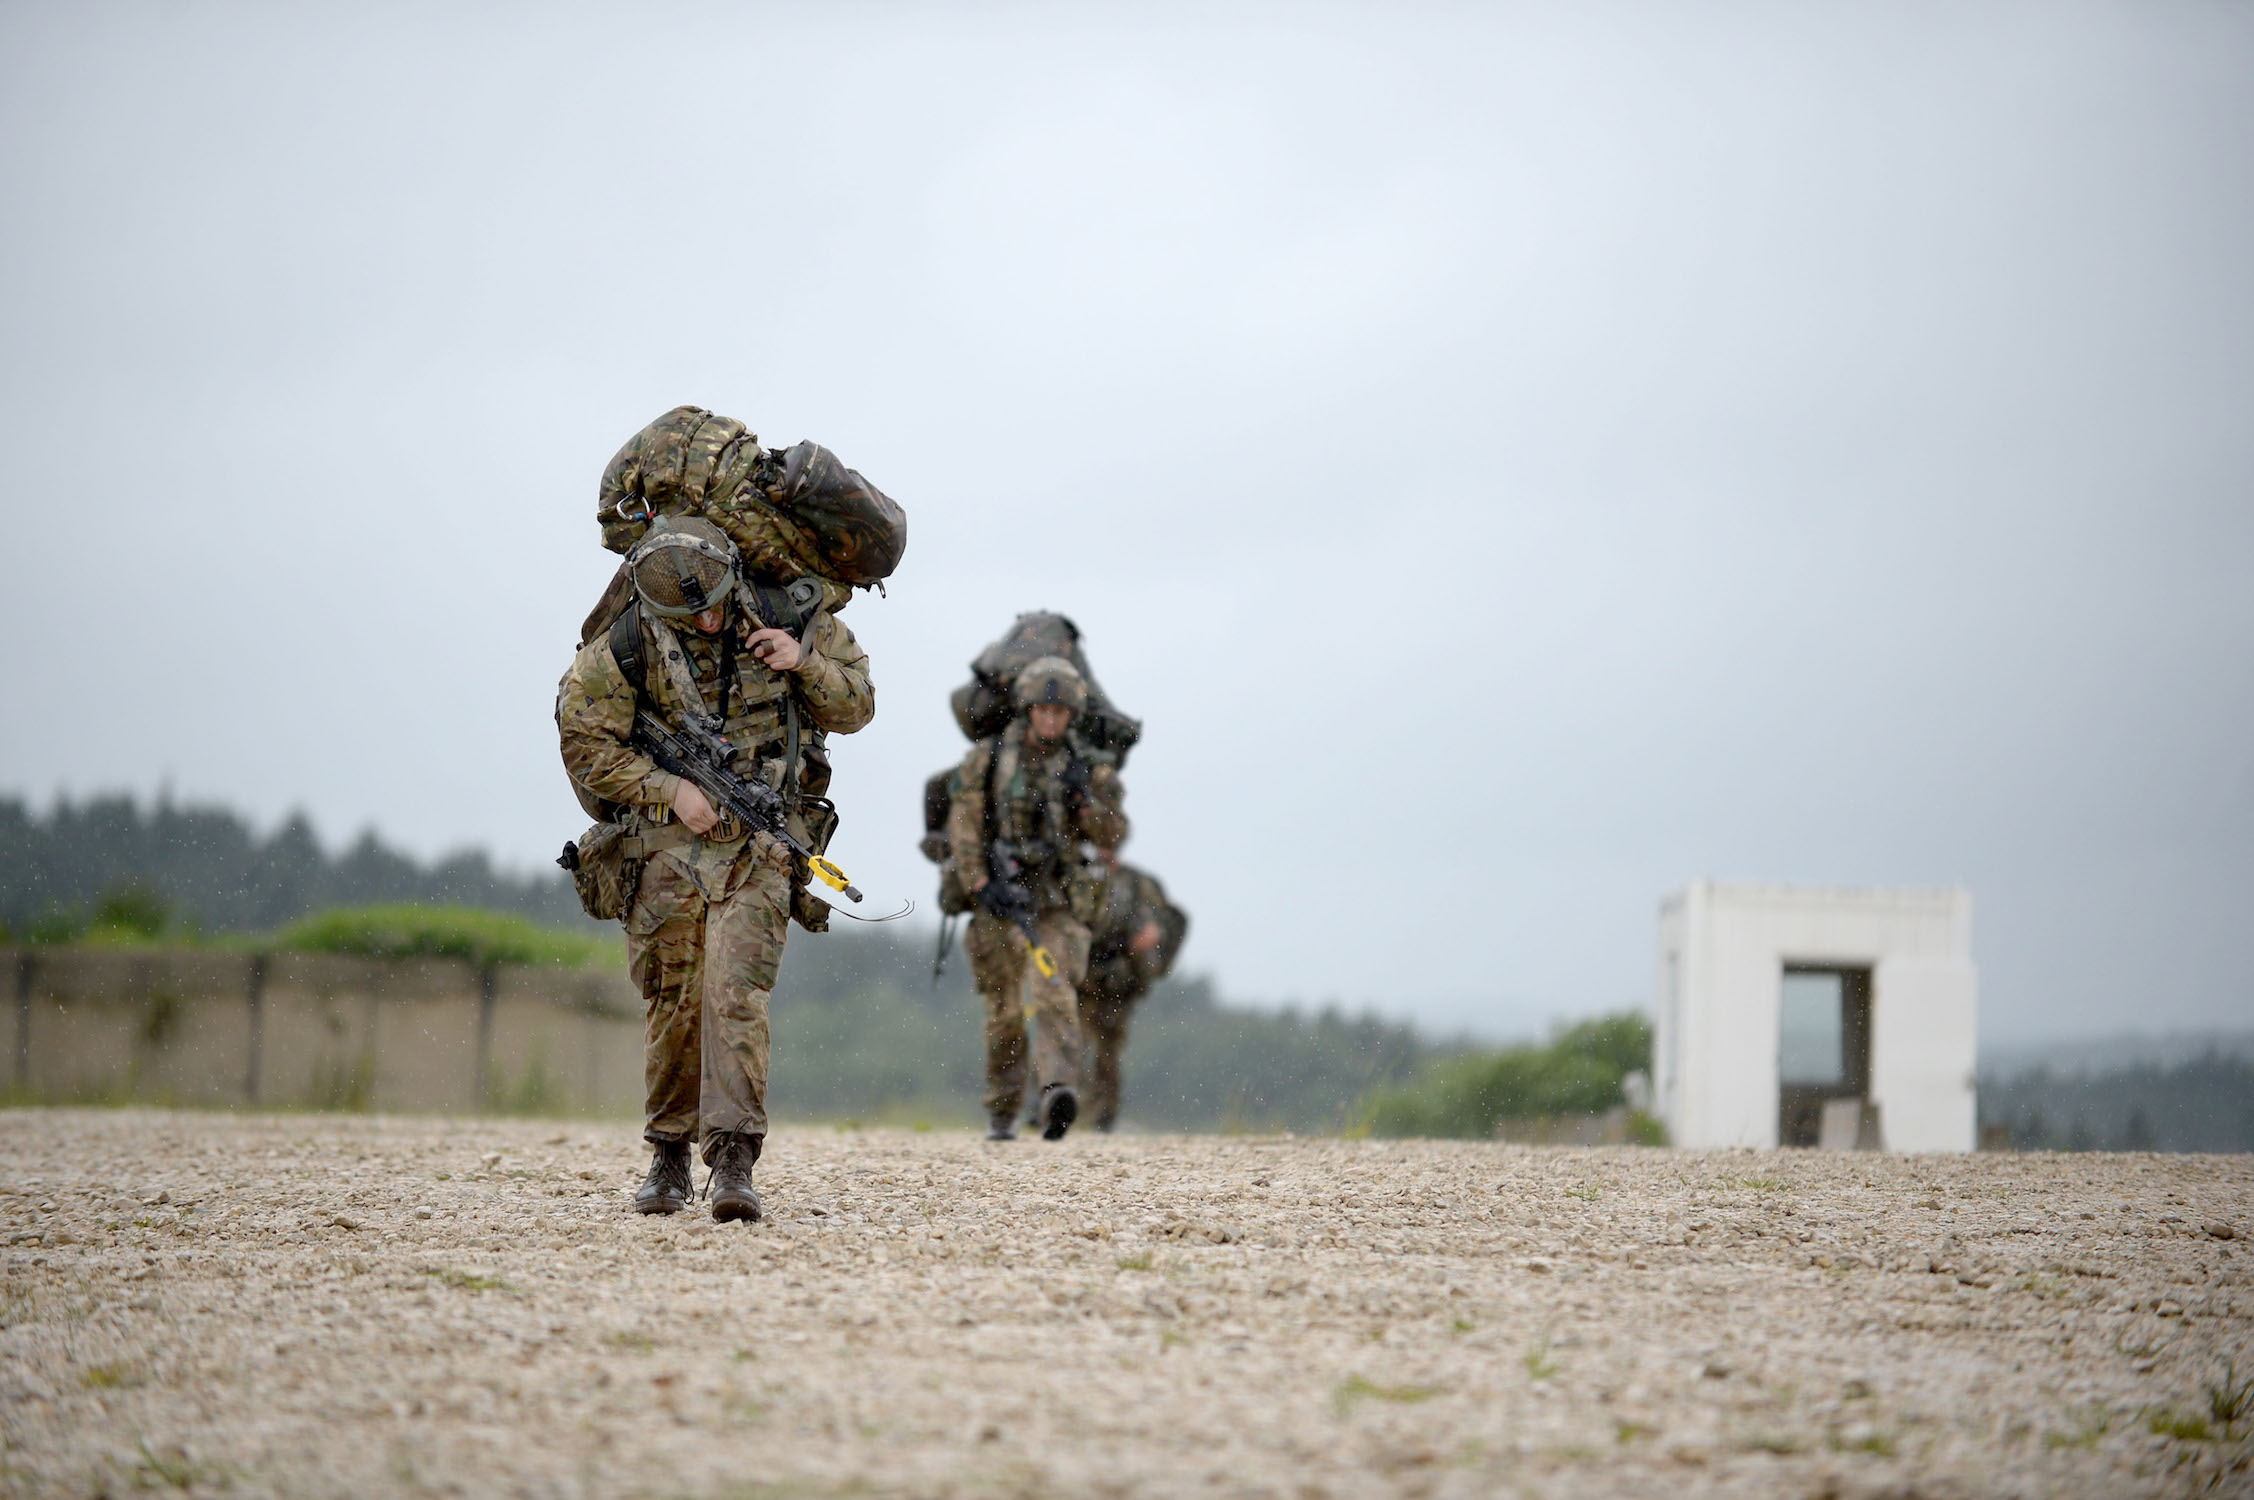 British Paratroopers training alongside NATO counterparts during the multi-national Exercise Swift Response in Germany in June 2016.